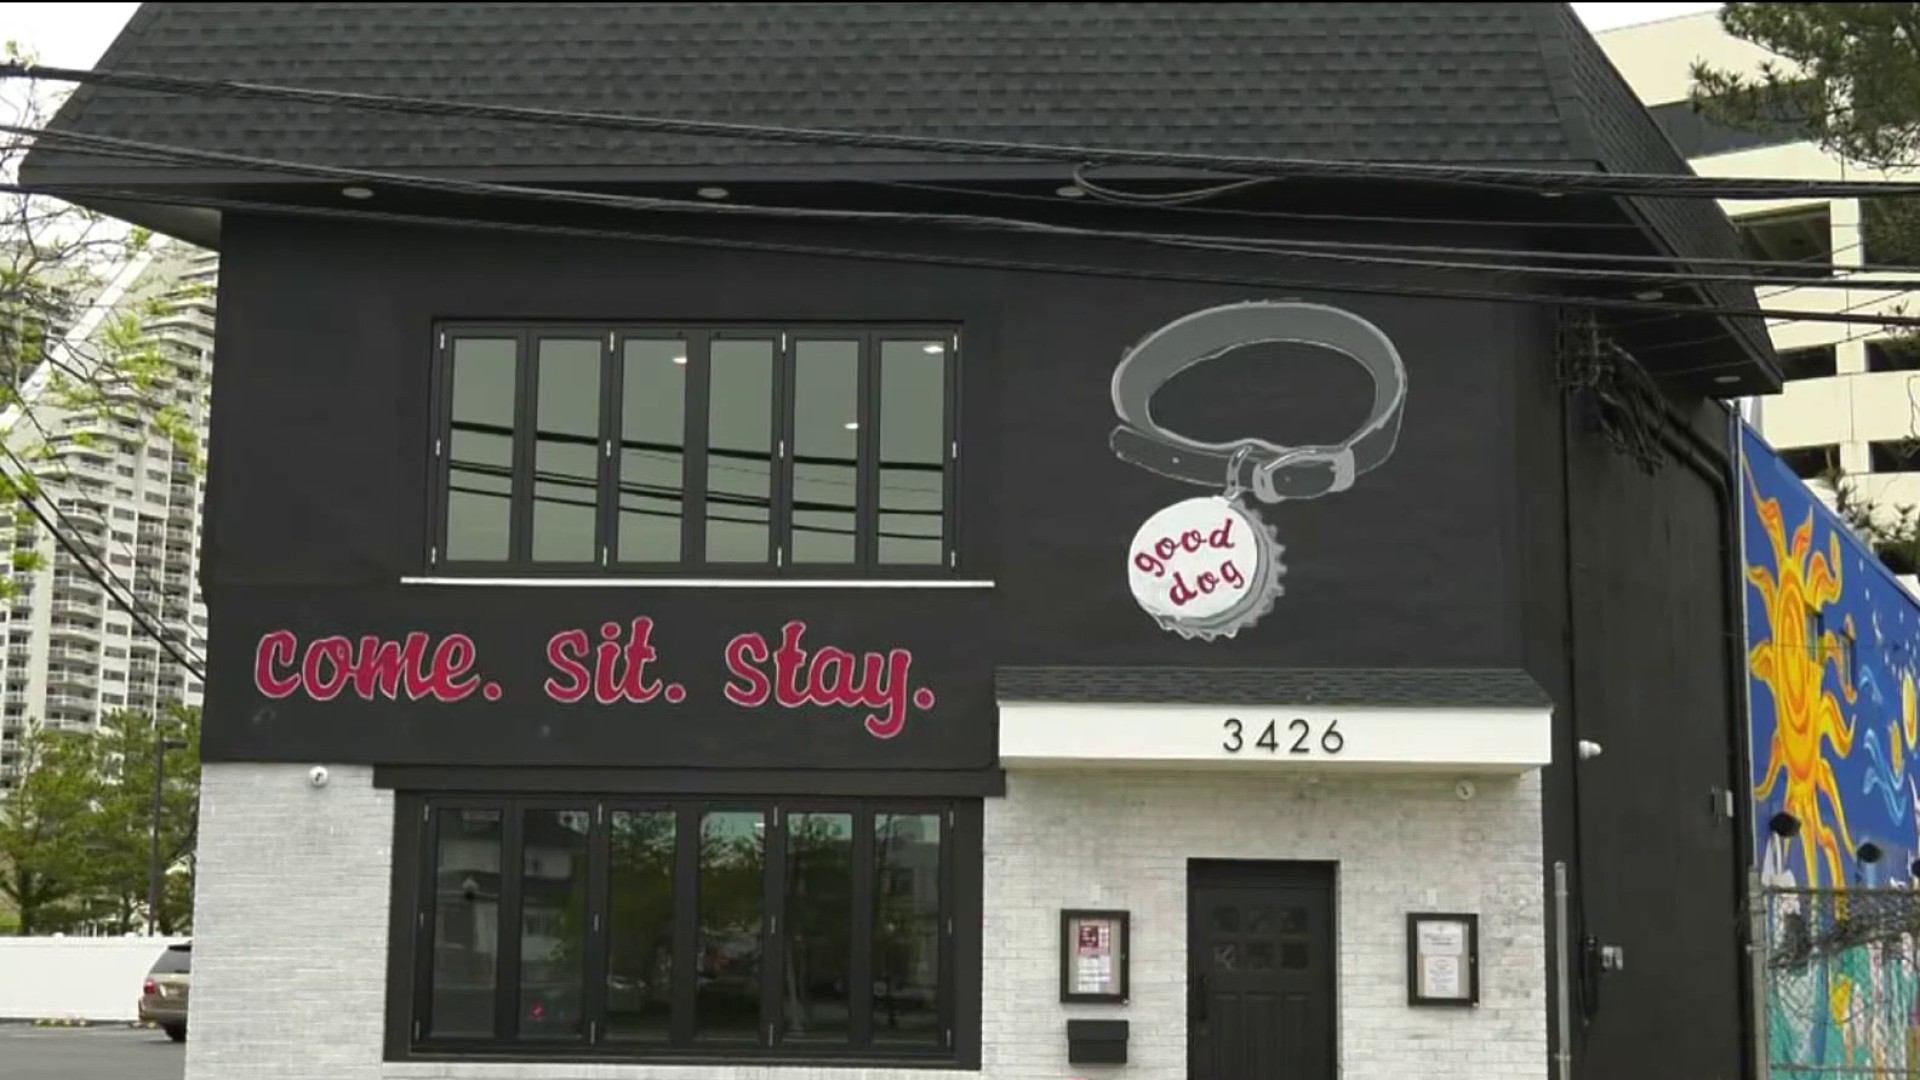 An Old Jersey Shore Swingers Sex Club Is Being Repurposed Into a New pic